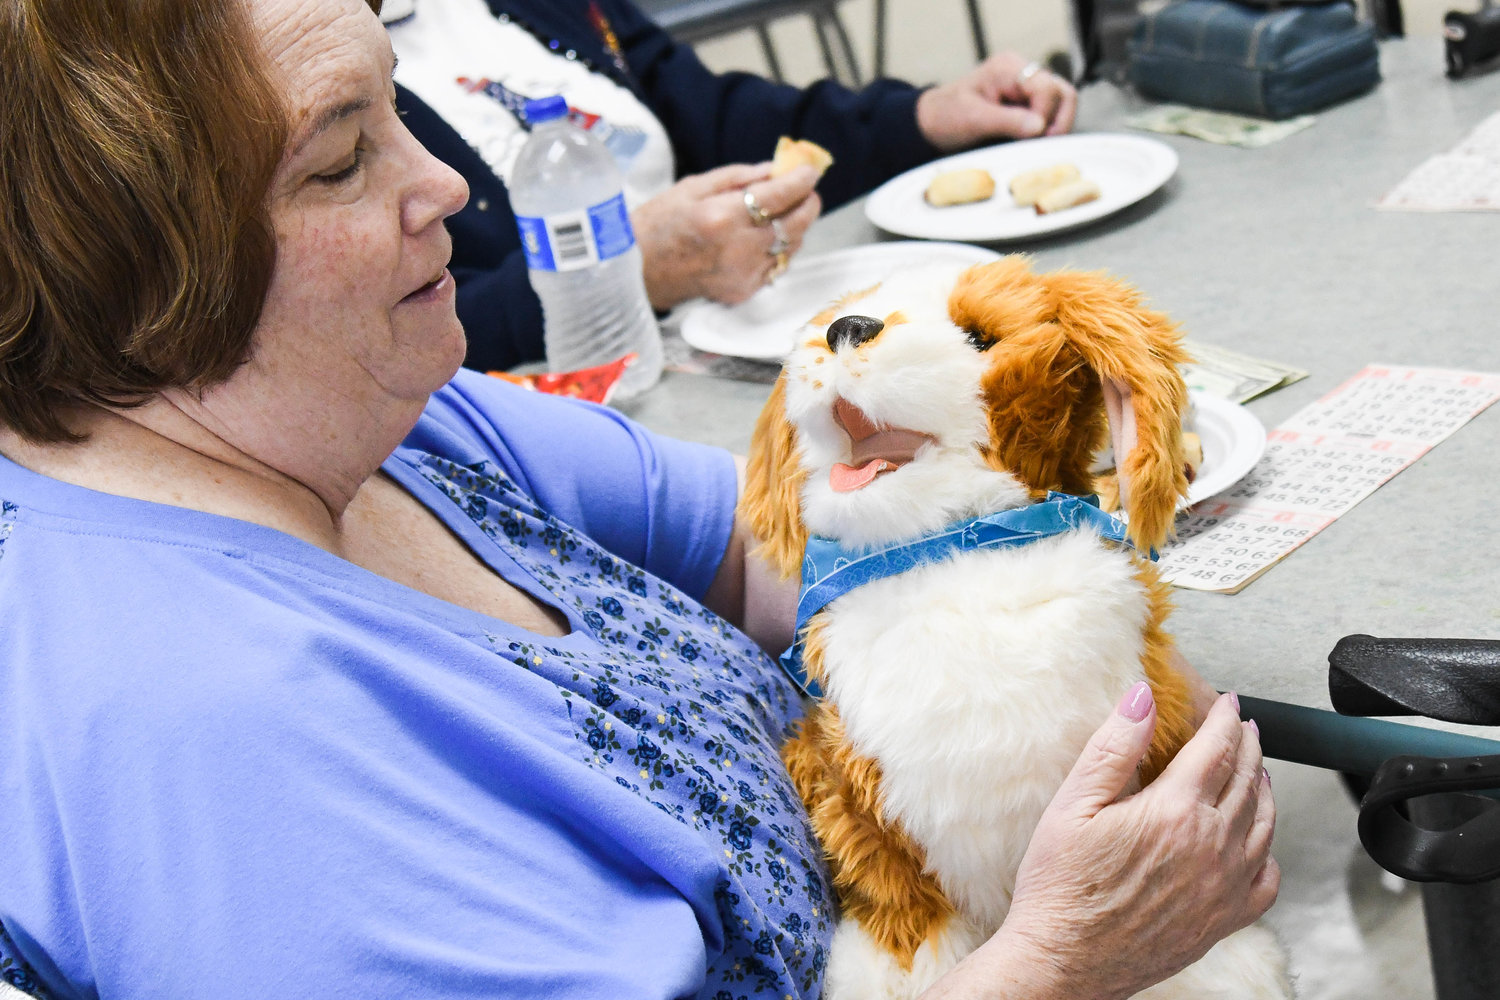 A member of the North Utica Senior Citizens Community Center holds an animatronic dog.